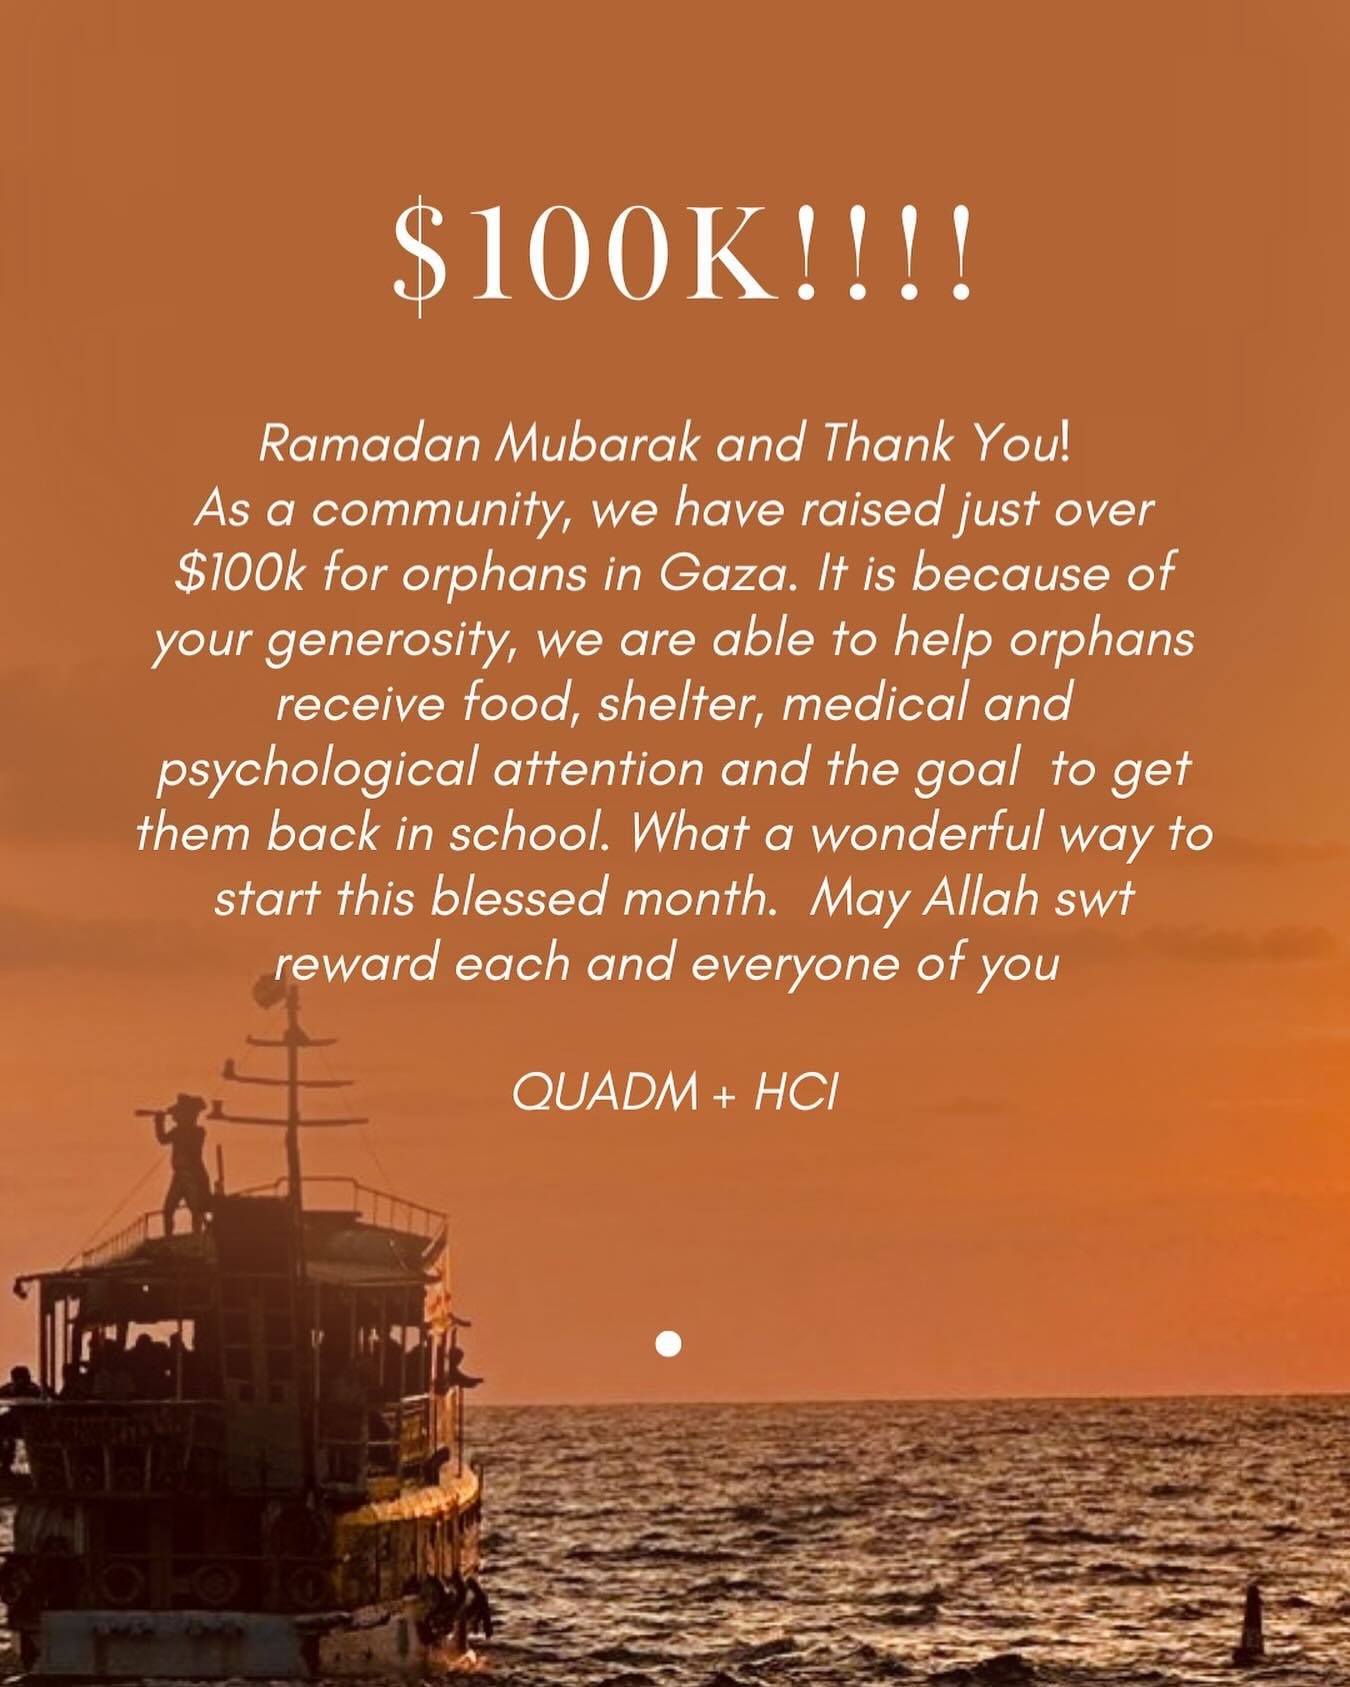 Ramadan Mubarak and Thank You! 

As a community, we have raised just over $100k for orphans in Gaza. It is because of your generosity, we are able to help orphans receive food, shelter, medical and psychological attention and the goal  to get them ba